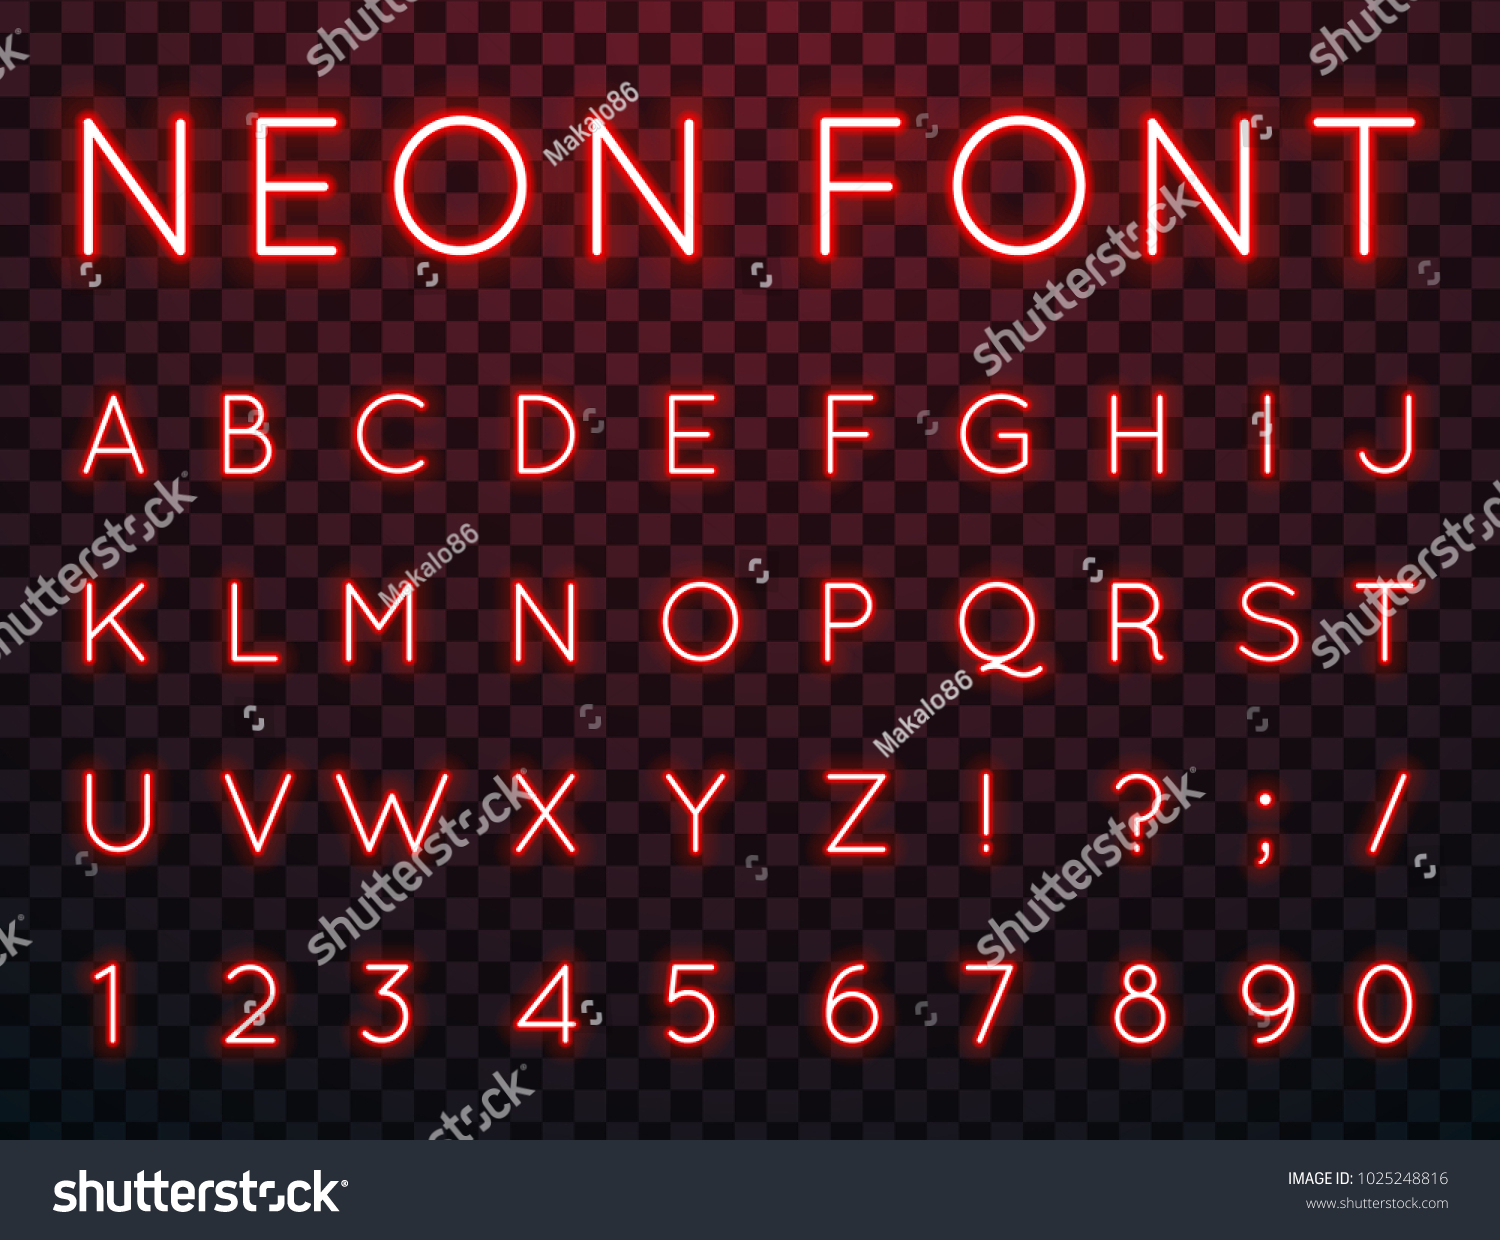 Vector set of characters in retro style. Neon font. Alphabet with glow effect. The letters and numbers in the style of techno. #1025248816